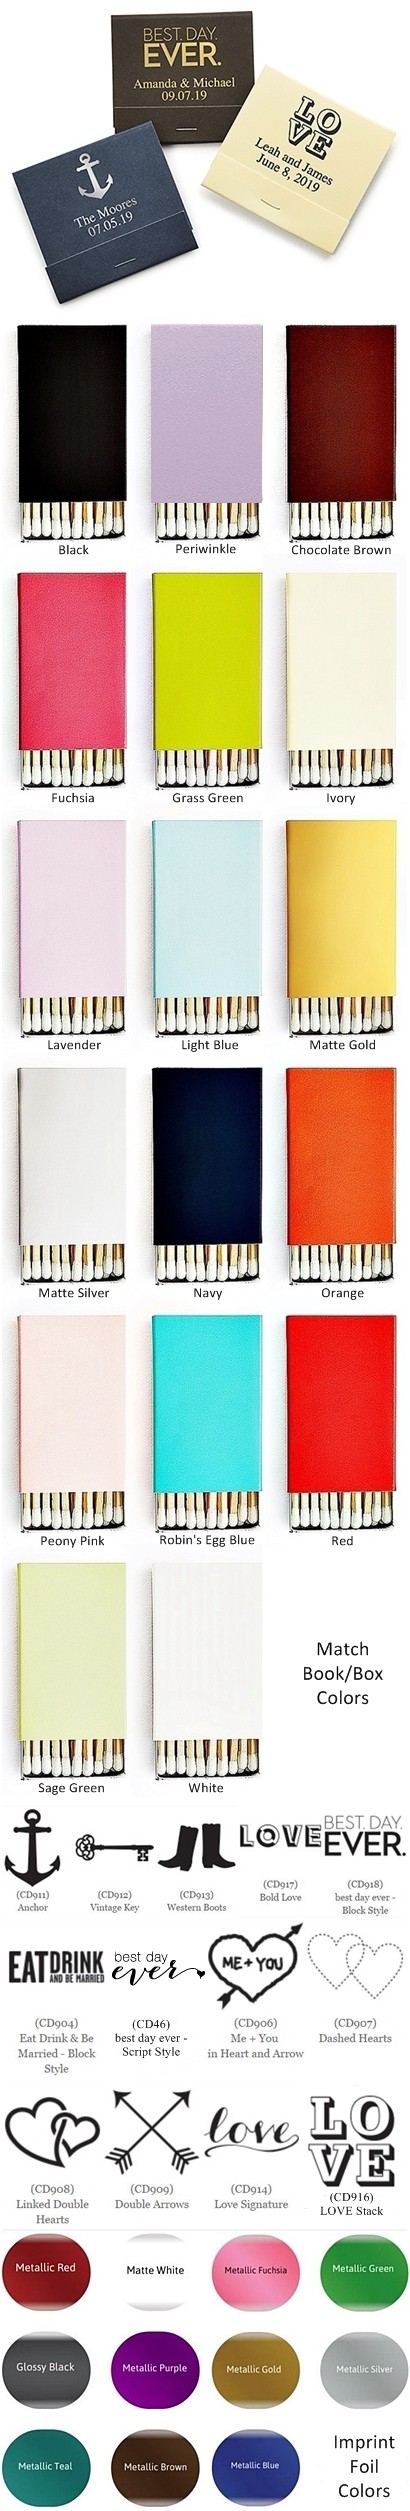 Personalized Foil-Stamped Matchbook (13 Designs)(17 Colors)(Set of 50)